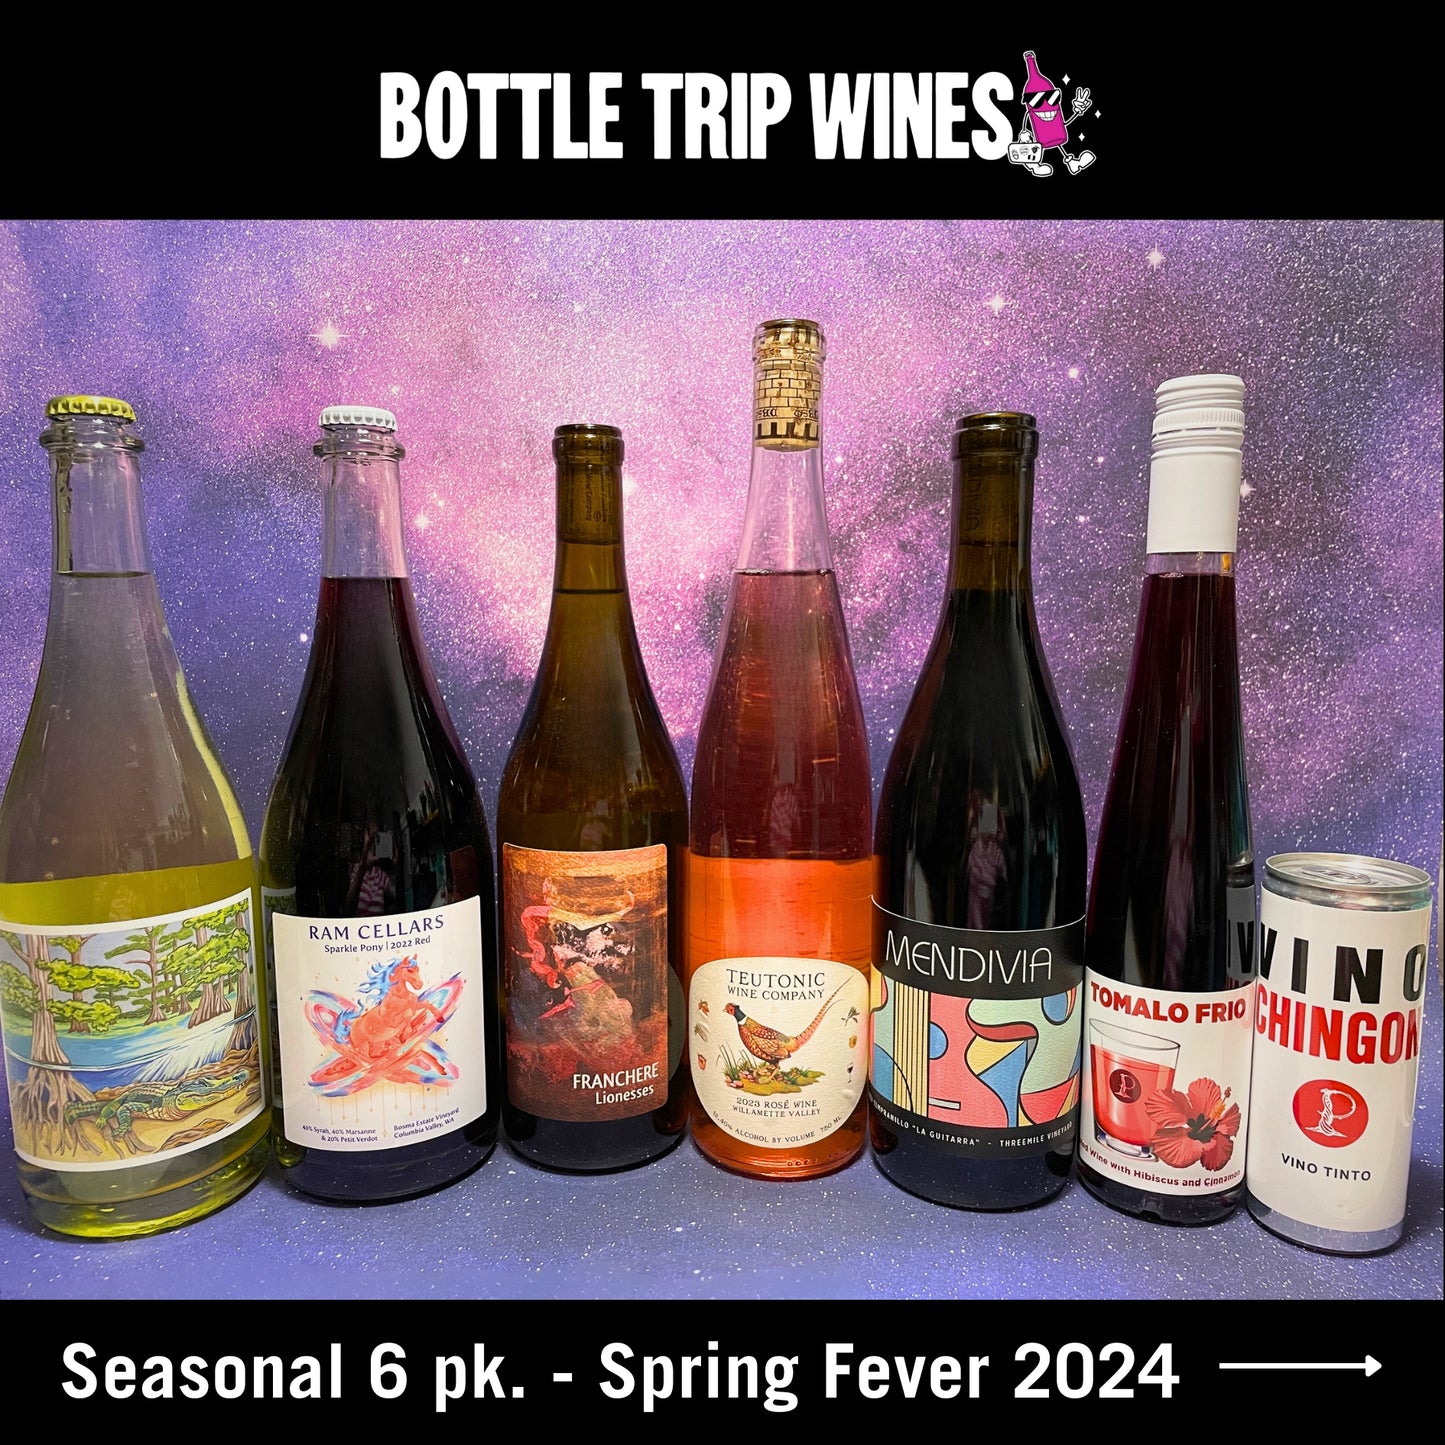 Seasonal 6-pack: “Spring Fever 2024” MYSTERY EDITION